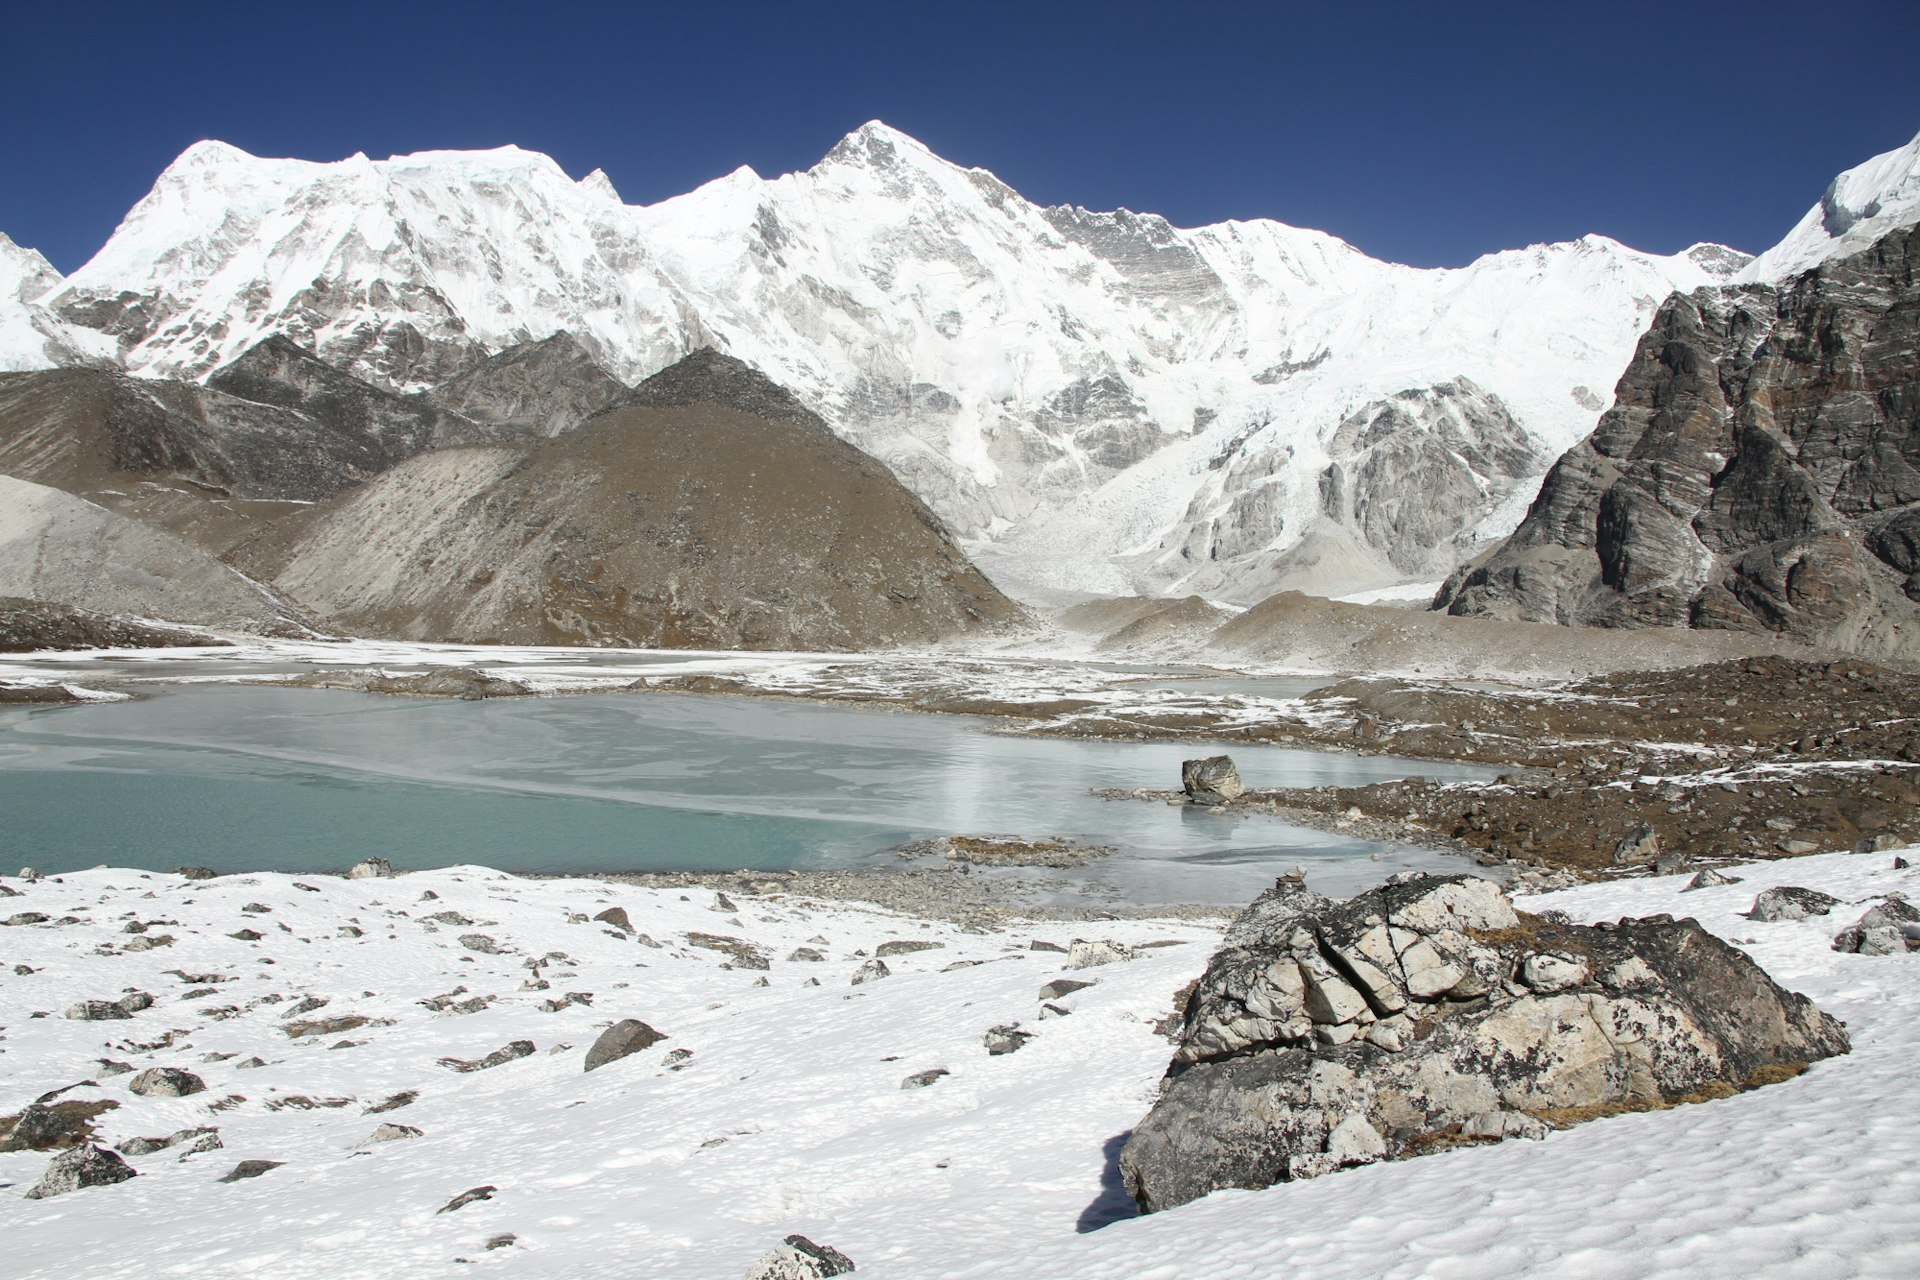 Lake 6 on the moraine of the Ngozumpa Glacier, above Gokyo. Image by Bradley Mayhew / Lonely Planet